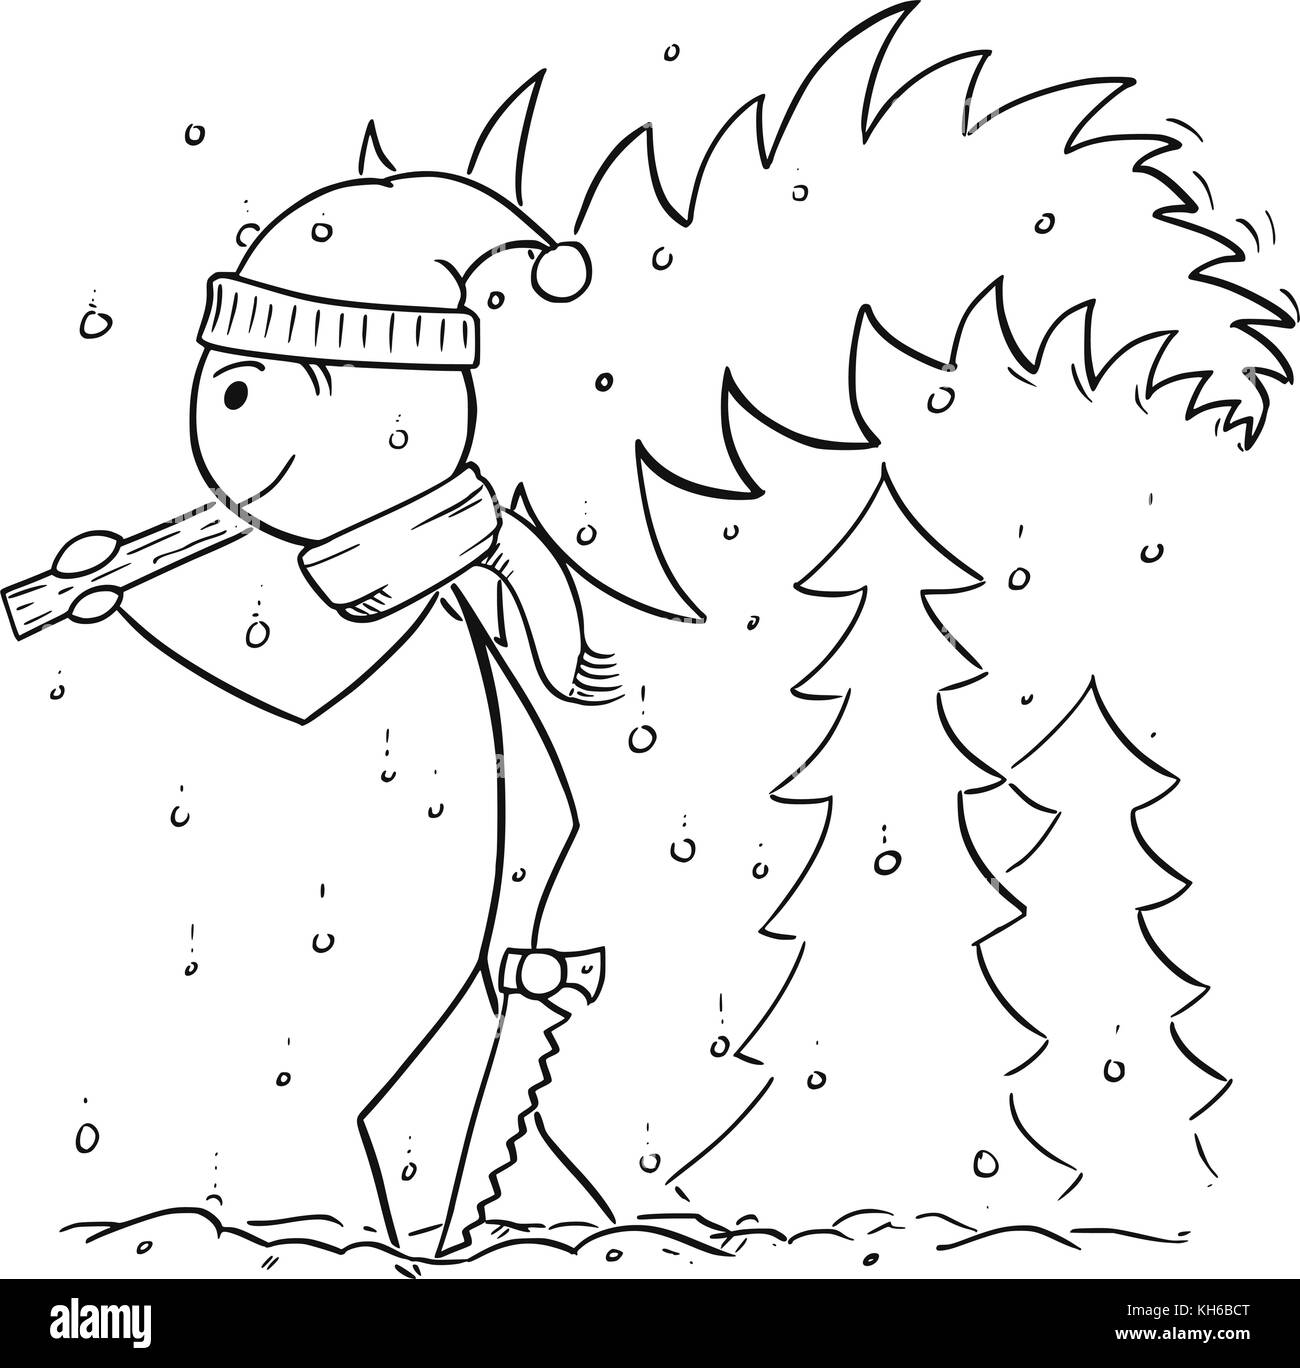 Cartoon stick man drawing illustration of man with saw carrying small tree from forest in snowfall for Christmas. Stock Vector